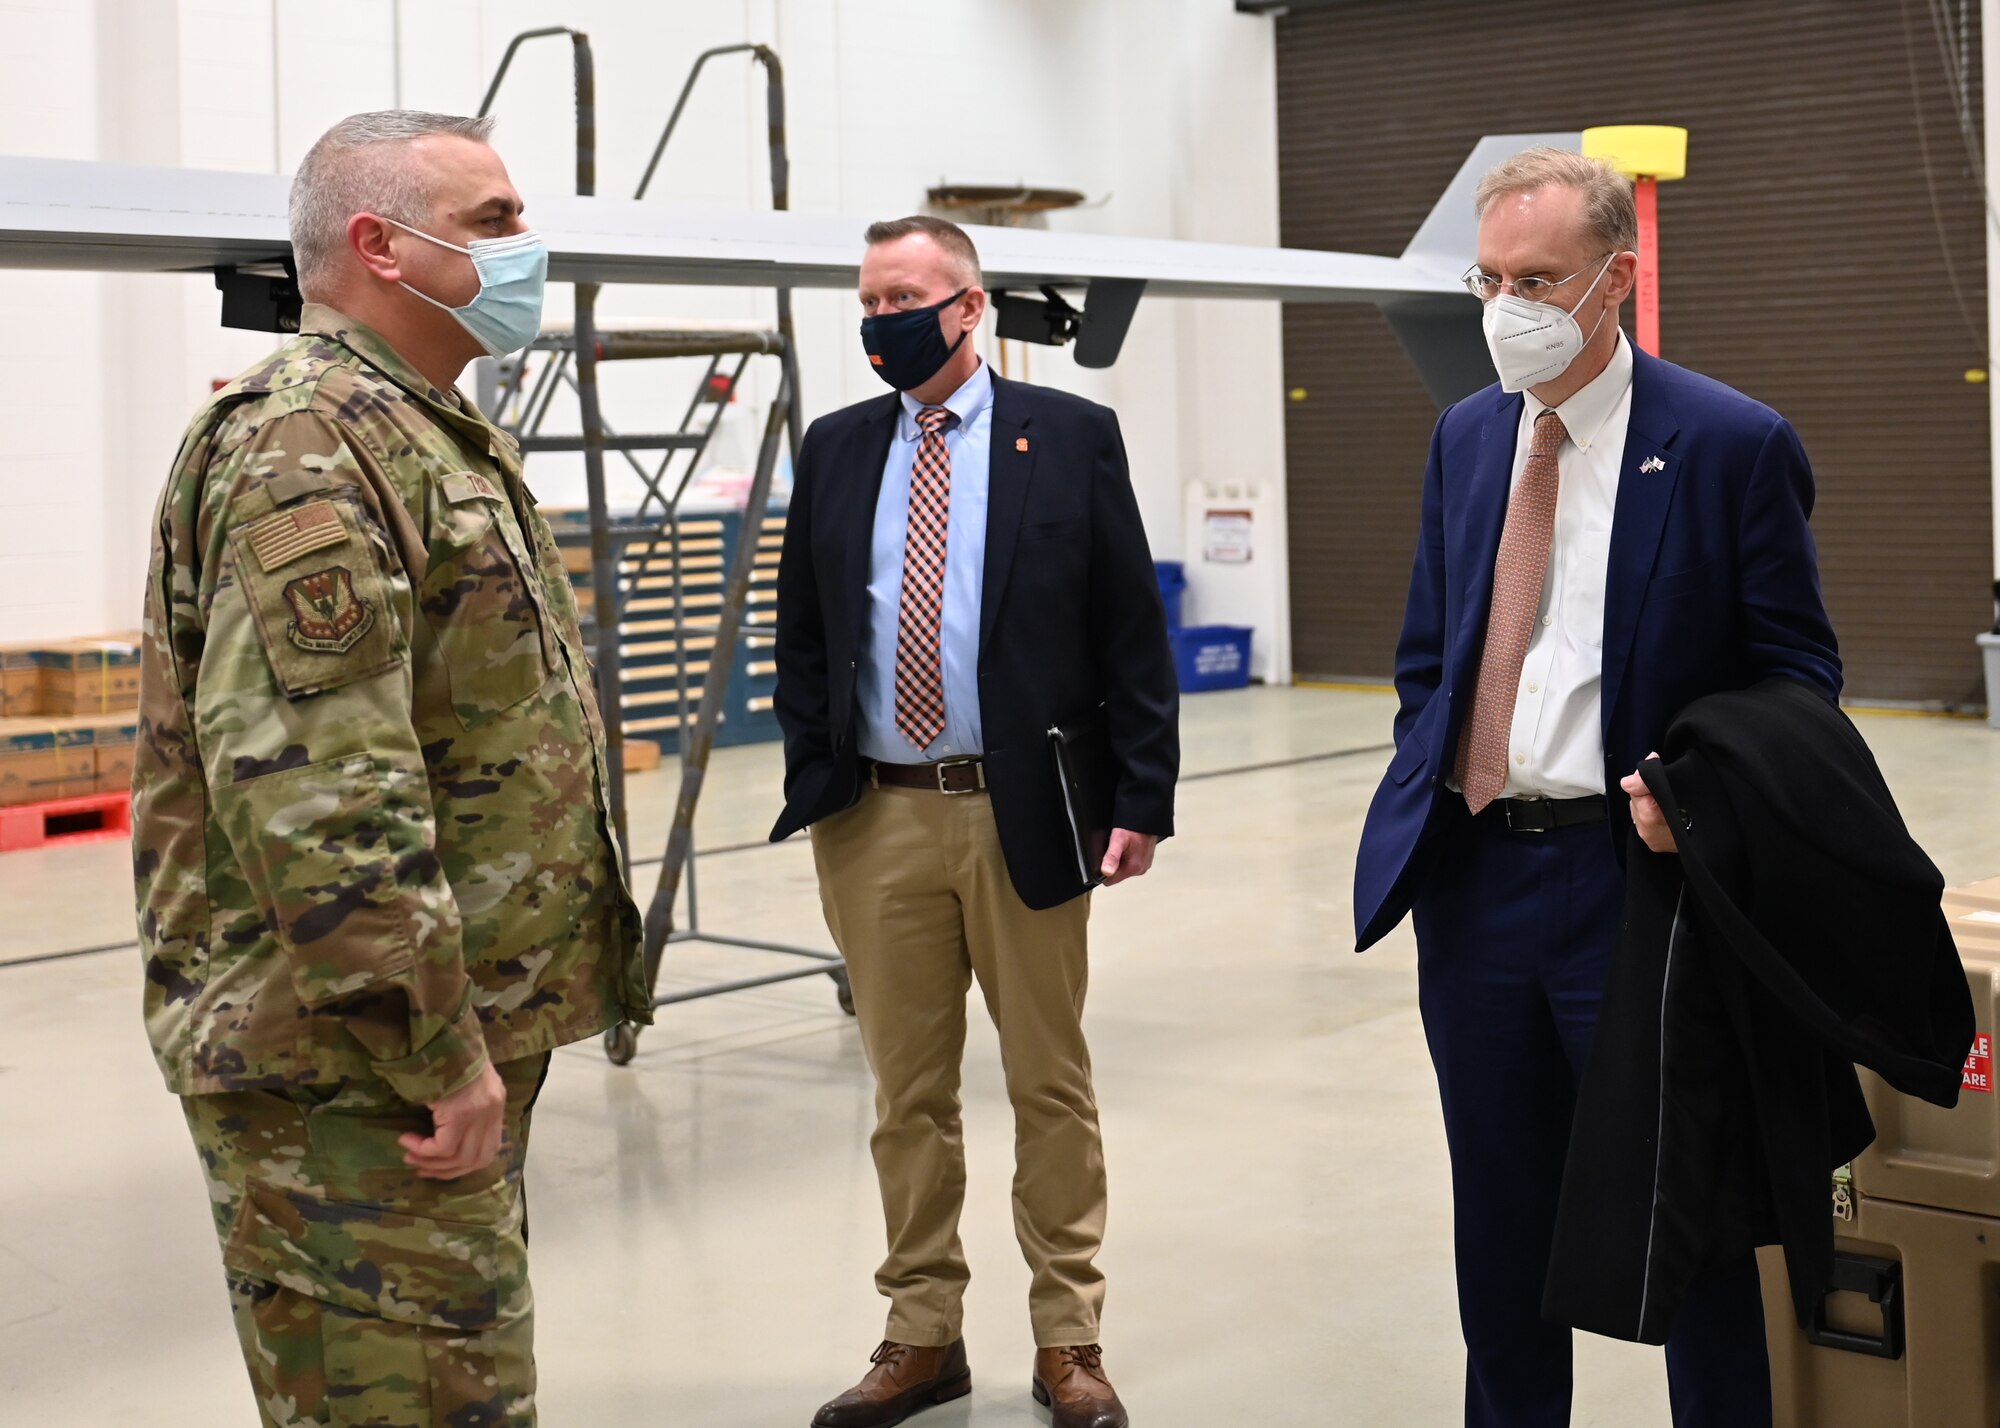 Syracuse University Chancellor Kent Syverud and Vice Chancellor for Strategic Initiatives and Innovation, Mike Haynie receive a tour from Senior Enlisted Leader, Chief Master Ian Tucker of the Field Training Detachment at Hancock Air National Guard base on Feb. 17, 2022.